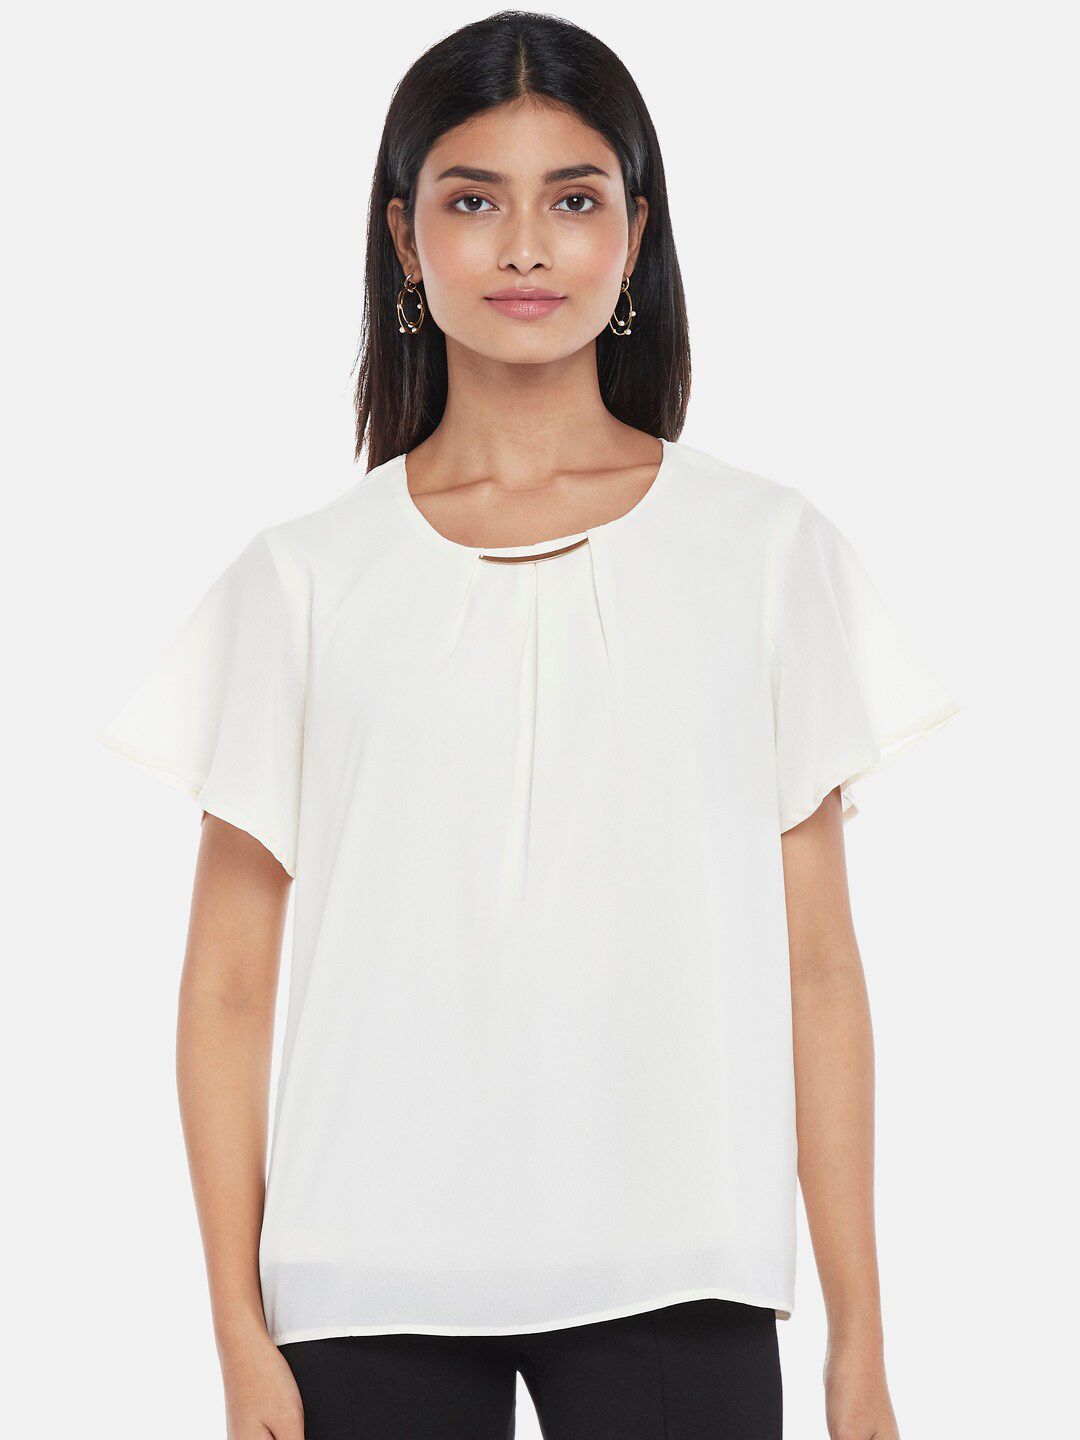 Annabelle by Pantaloons Women White Short Sleeves Top Price in India